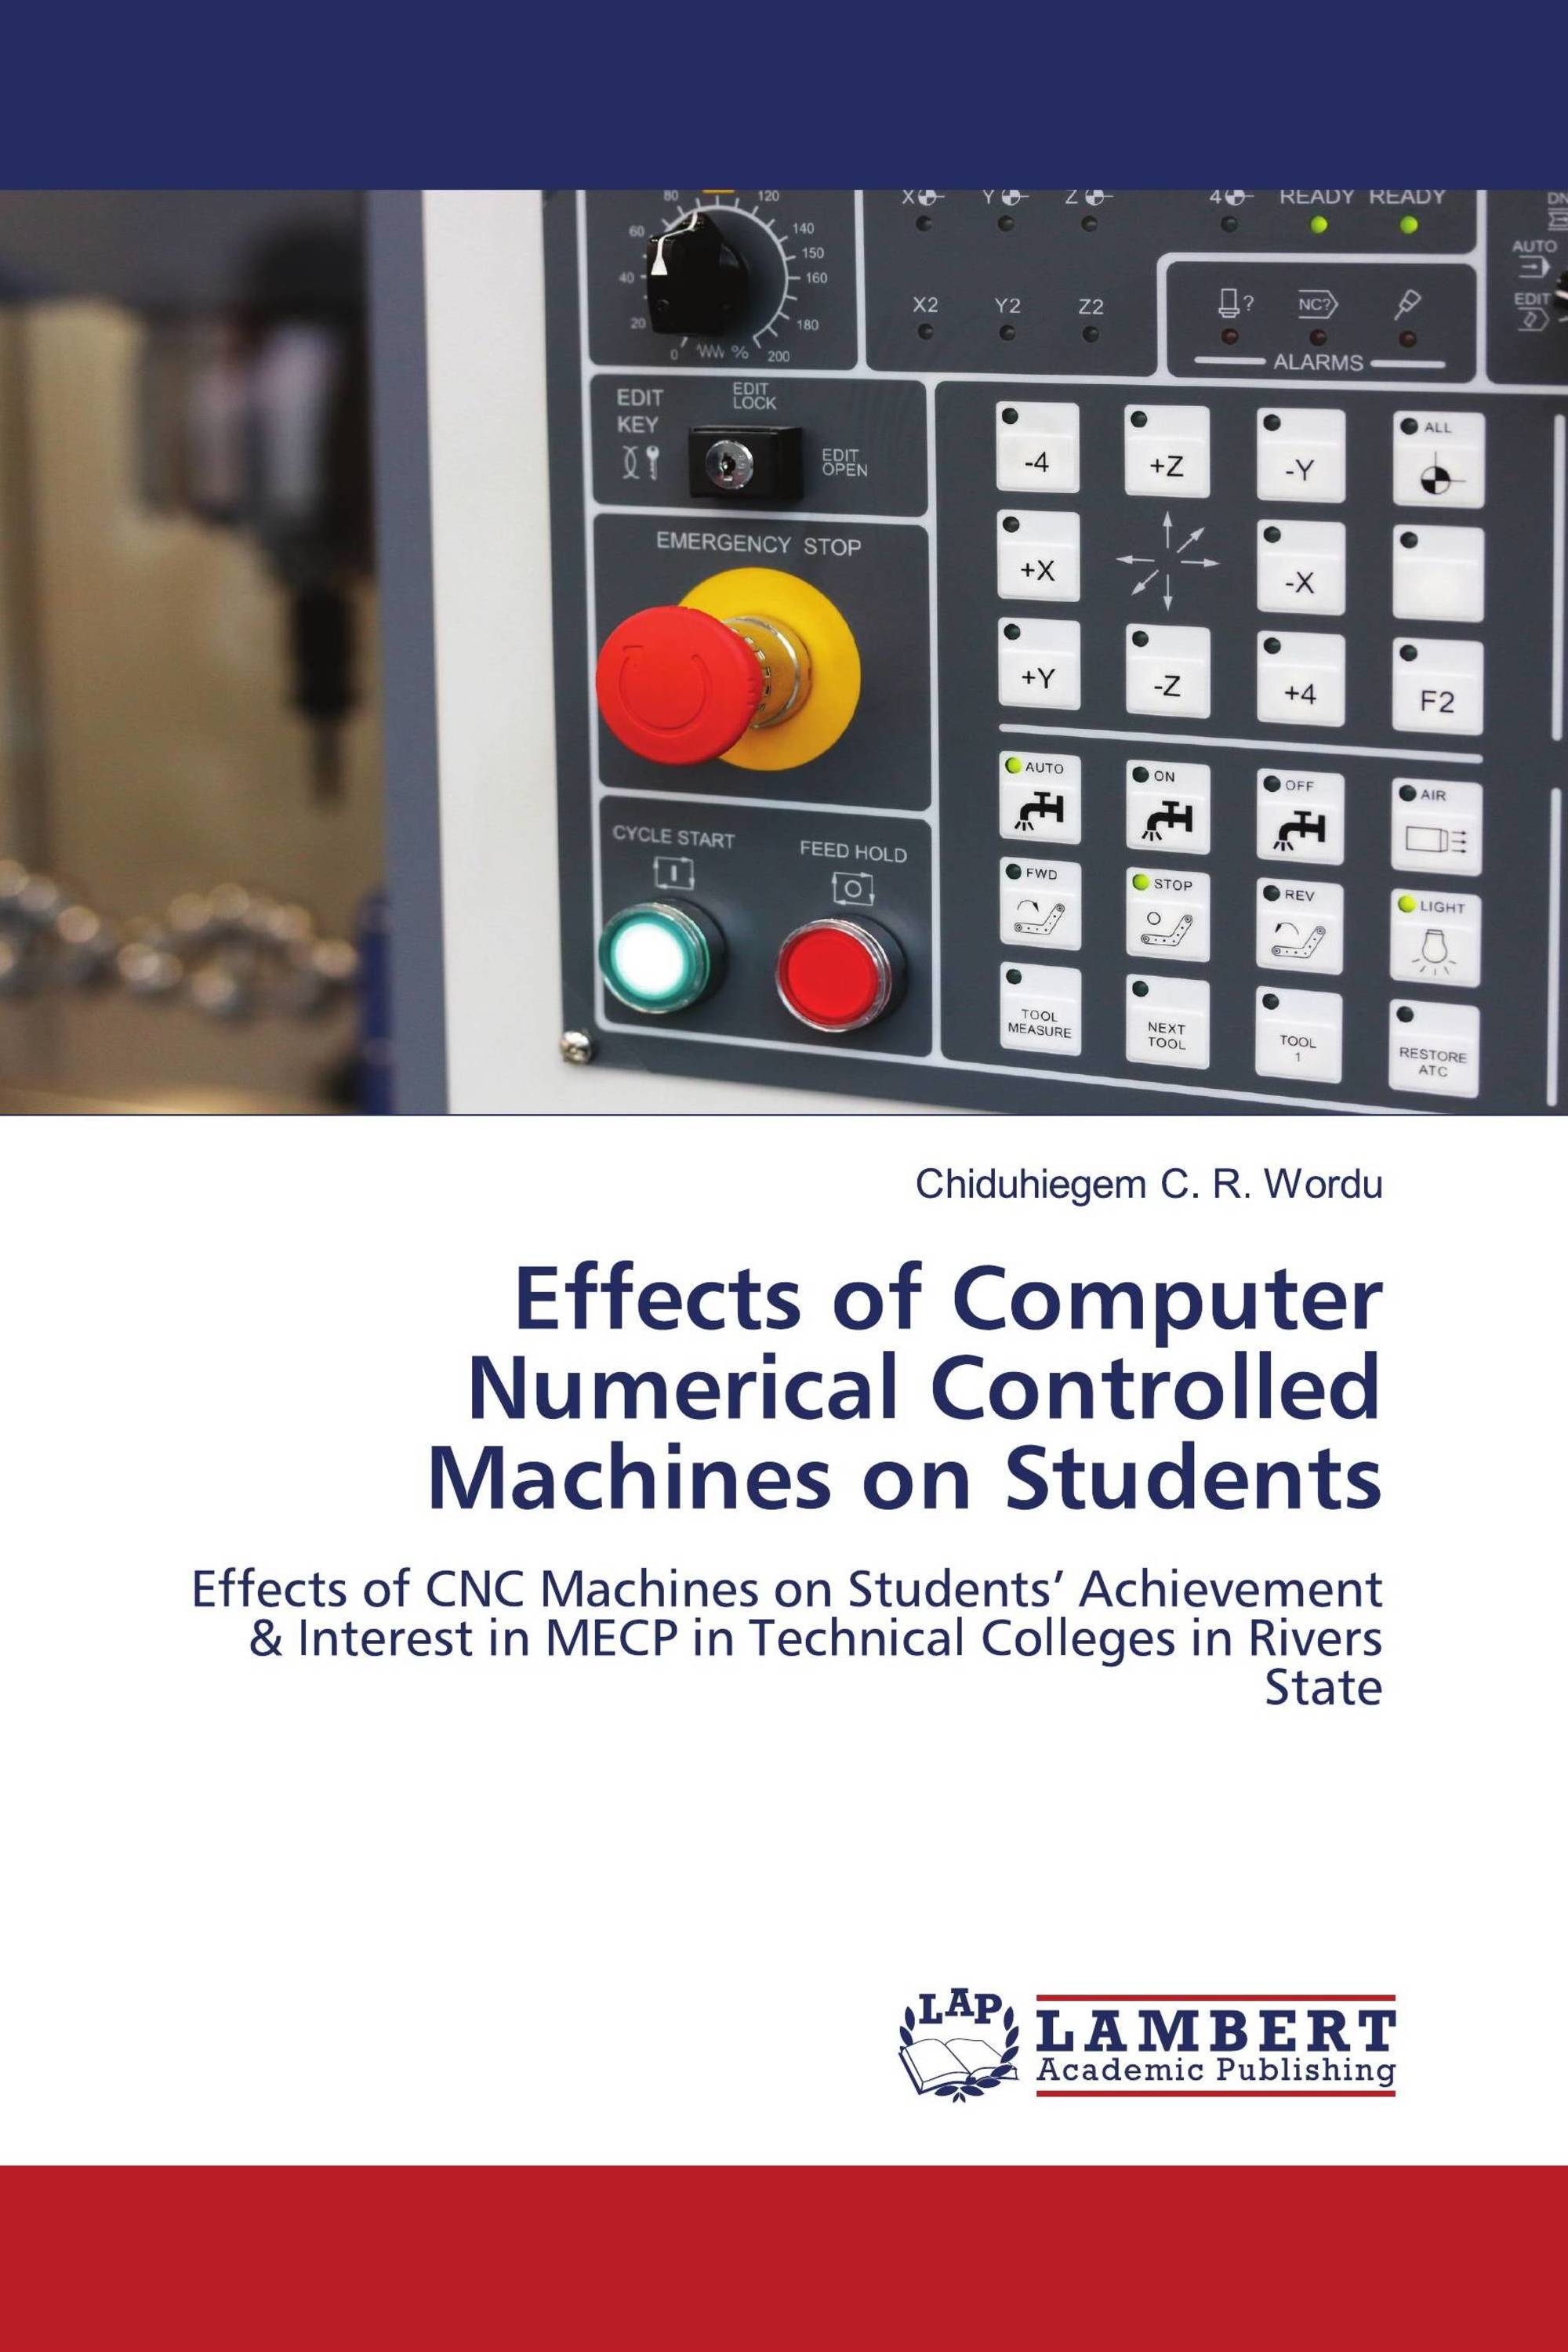 Effects of Computer Numerical Controlled Machines on Students